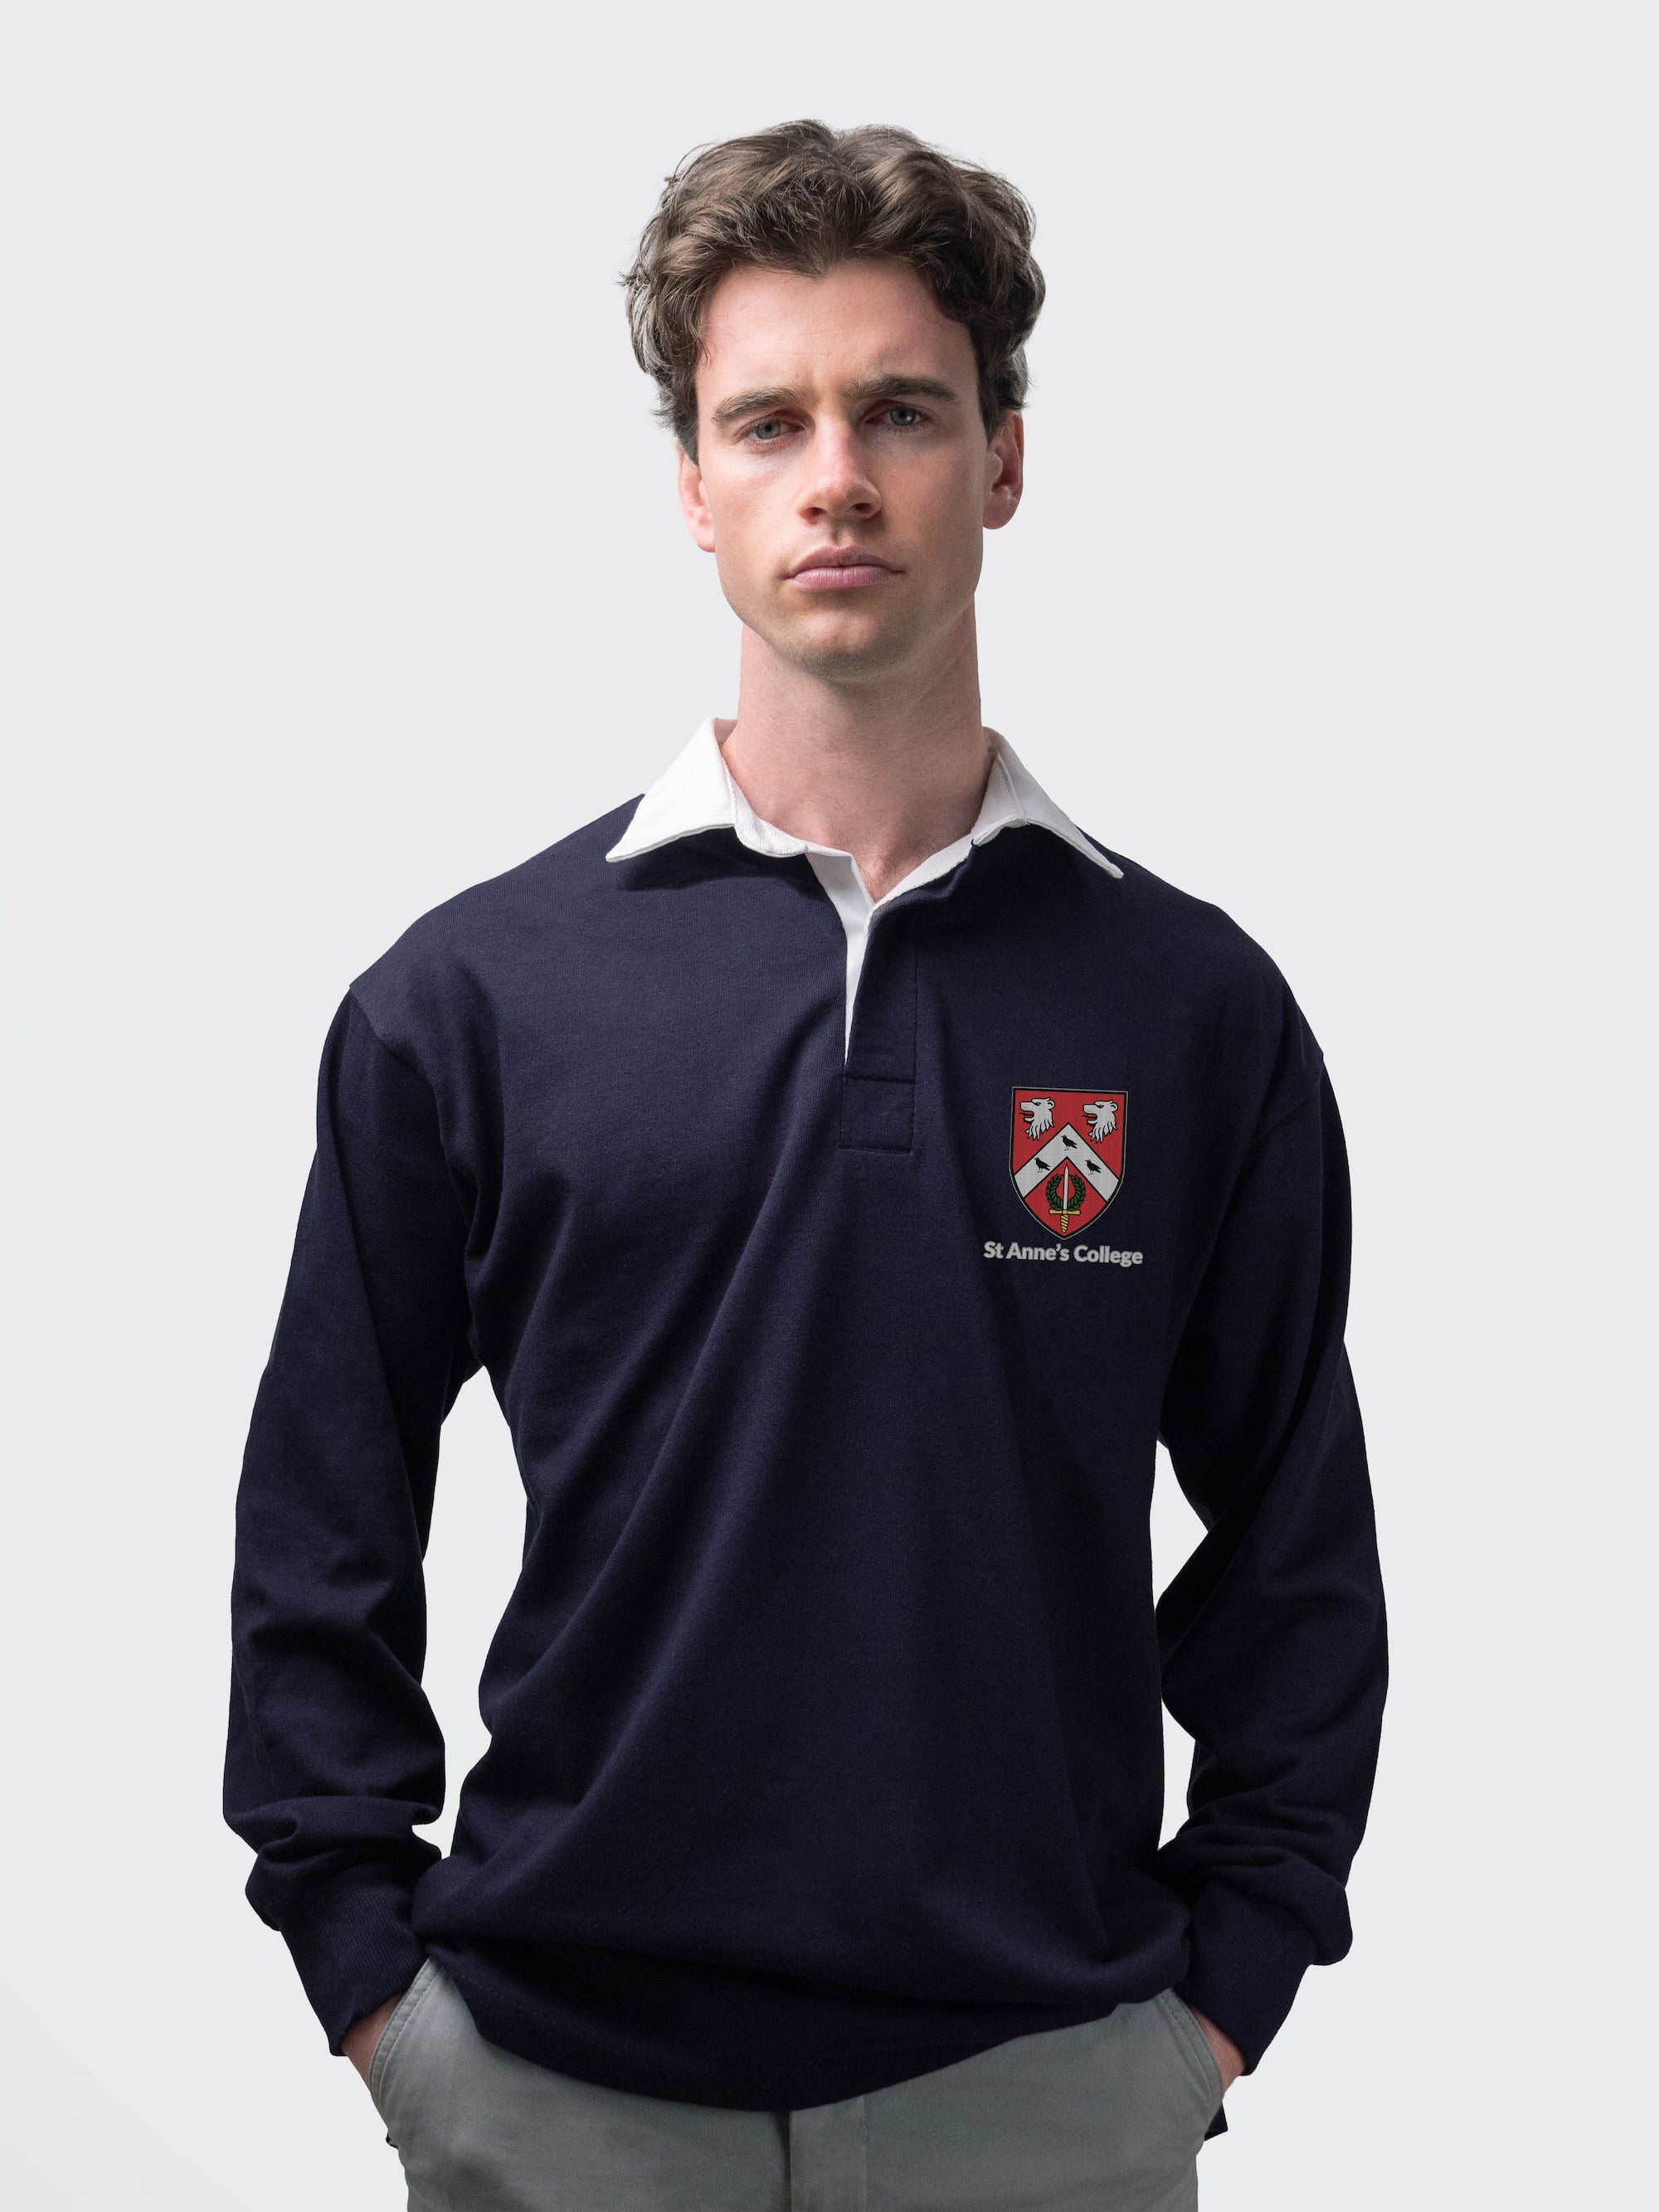 St Anne's student wearing an embroidered mens rugby shirt in navy